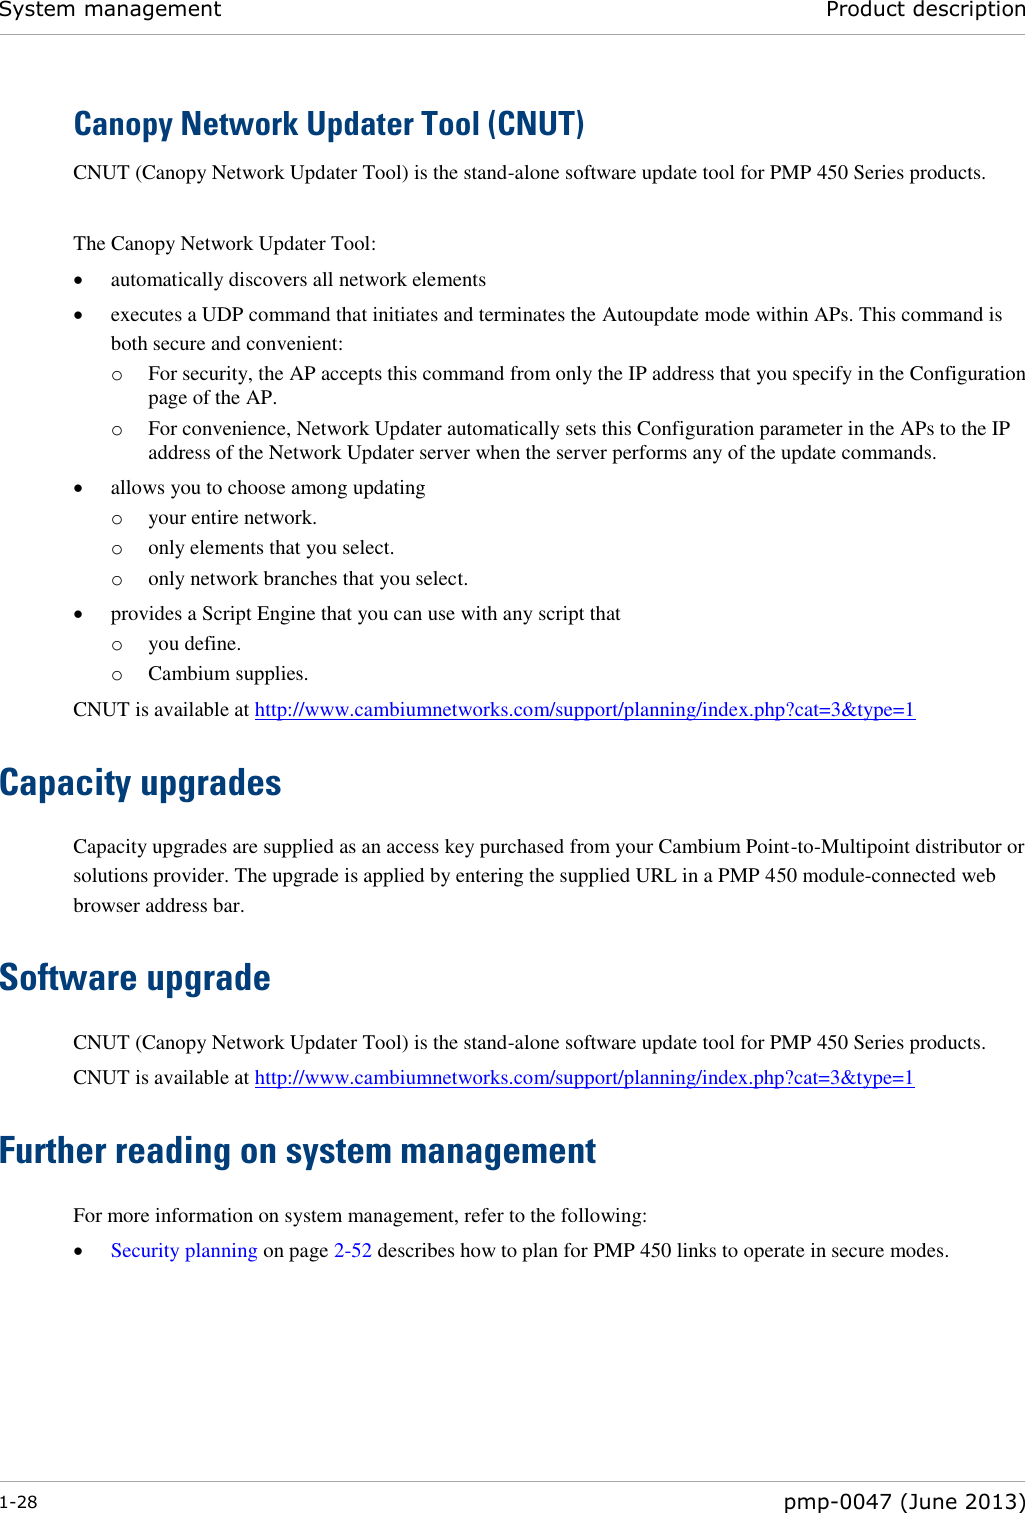 System management Product description  1-28  pmp-0047 (June 2013)  Canopy Network Updater Tool (CNUT) CNUT (Canopy Network Updater Tool) is the stand-alone software update tool for PMP 450 Series products.   The Canopy Network Updater Tool:  automatically discovers all network elements  executes a UDP command that initiates and terminates the Autoupdate mode within APs. This command is both secure and convenient: o For security, the AP accepts this command from only the IP address that you specify in the Configuration page of the AP.  o For convenience, Network Updater automatically sets this Configuration parameter in the APs to the IP address of the Network Updater server when the server performs any of the update commands.  allows you to choose among updating o your entire network. o only elements that you select. o only network branches that you select.  provides a Script Engine that you can use with any script that o you define. o Cambium supplies. CNUT is available at http://www.cambiumnetworks.com/support/planning/index.php?cat=3&amp;type=1 Capacity upgrades Capacity upgrades are supplied as an access key purchased from your Cambium Point-to-Multipoint distributor or solutions provider. The upgrade is applied by entering the supplied URL in a PMP 450 module-connected web browser address bar. Software upgrade CNUT (Canopy Network Updater Tool) is the stand-alone software update tool for PMP 450 Series products.  CNUT is available at http://www.cambiumnetworks.com/support/planning/index.php?cat=3&amp;type=1  Further reading on system management For more information on system management, refer to the following:  Security planning on page 2-52 describes how to plan for PMP 450 links to operate in secure modes.